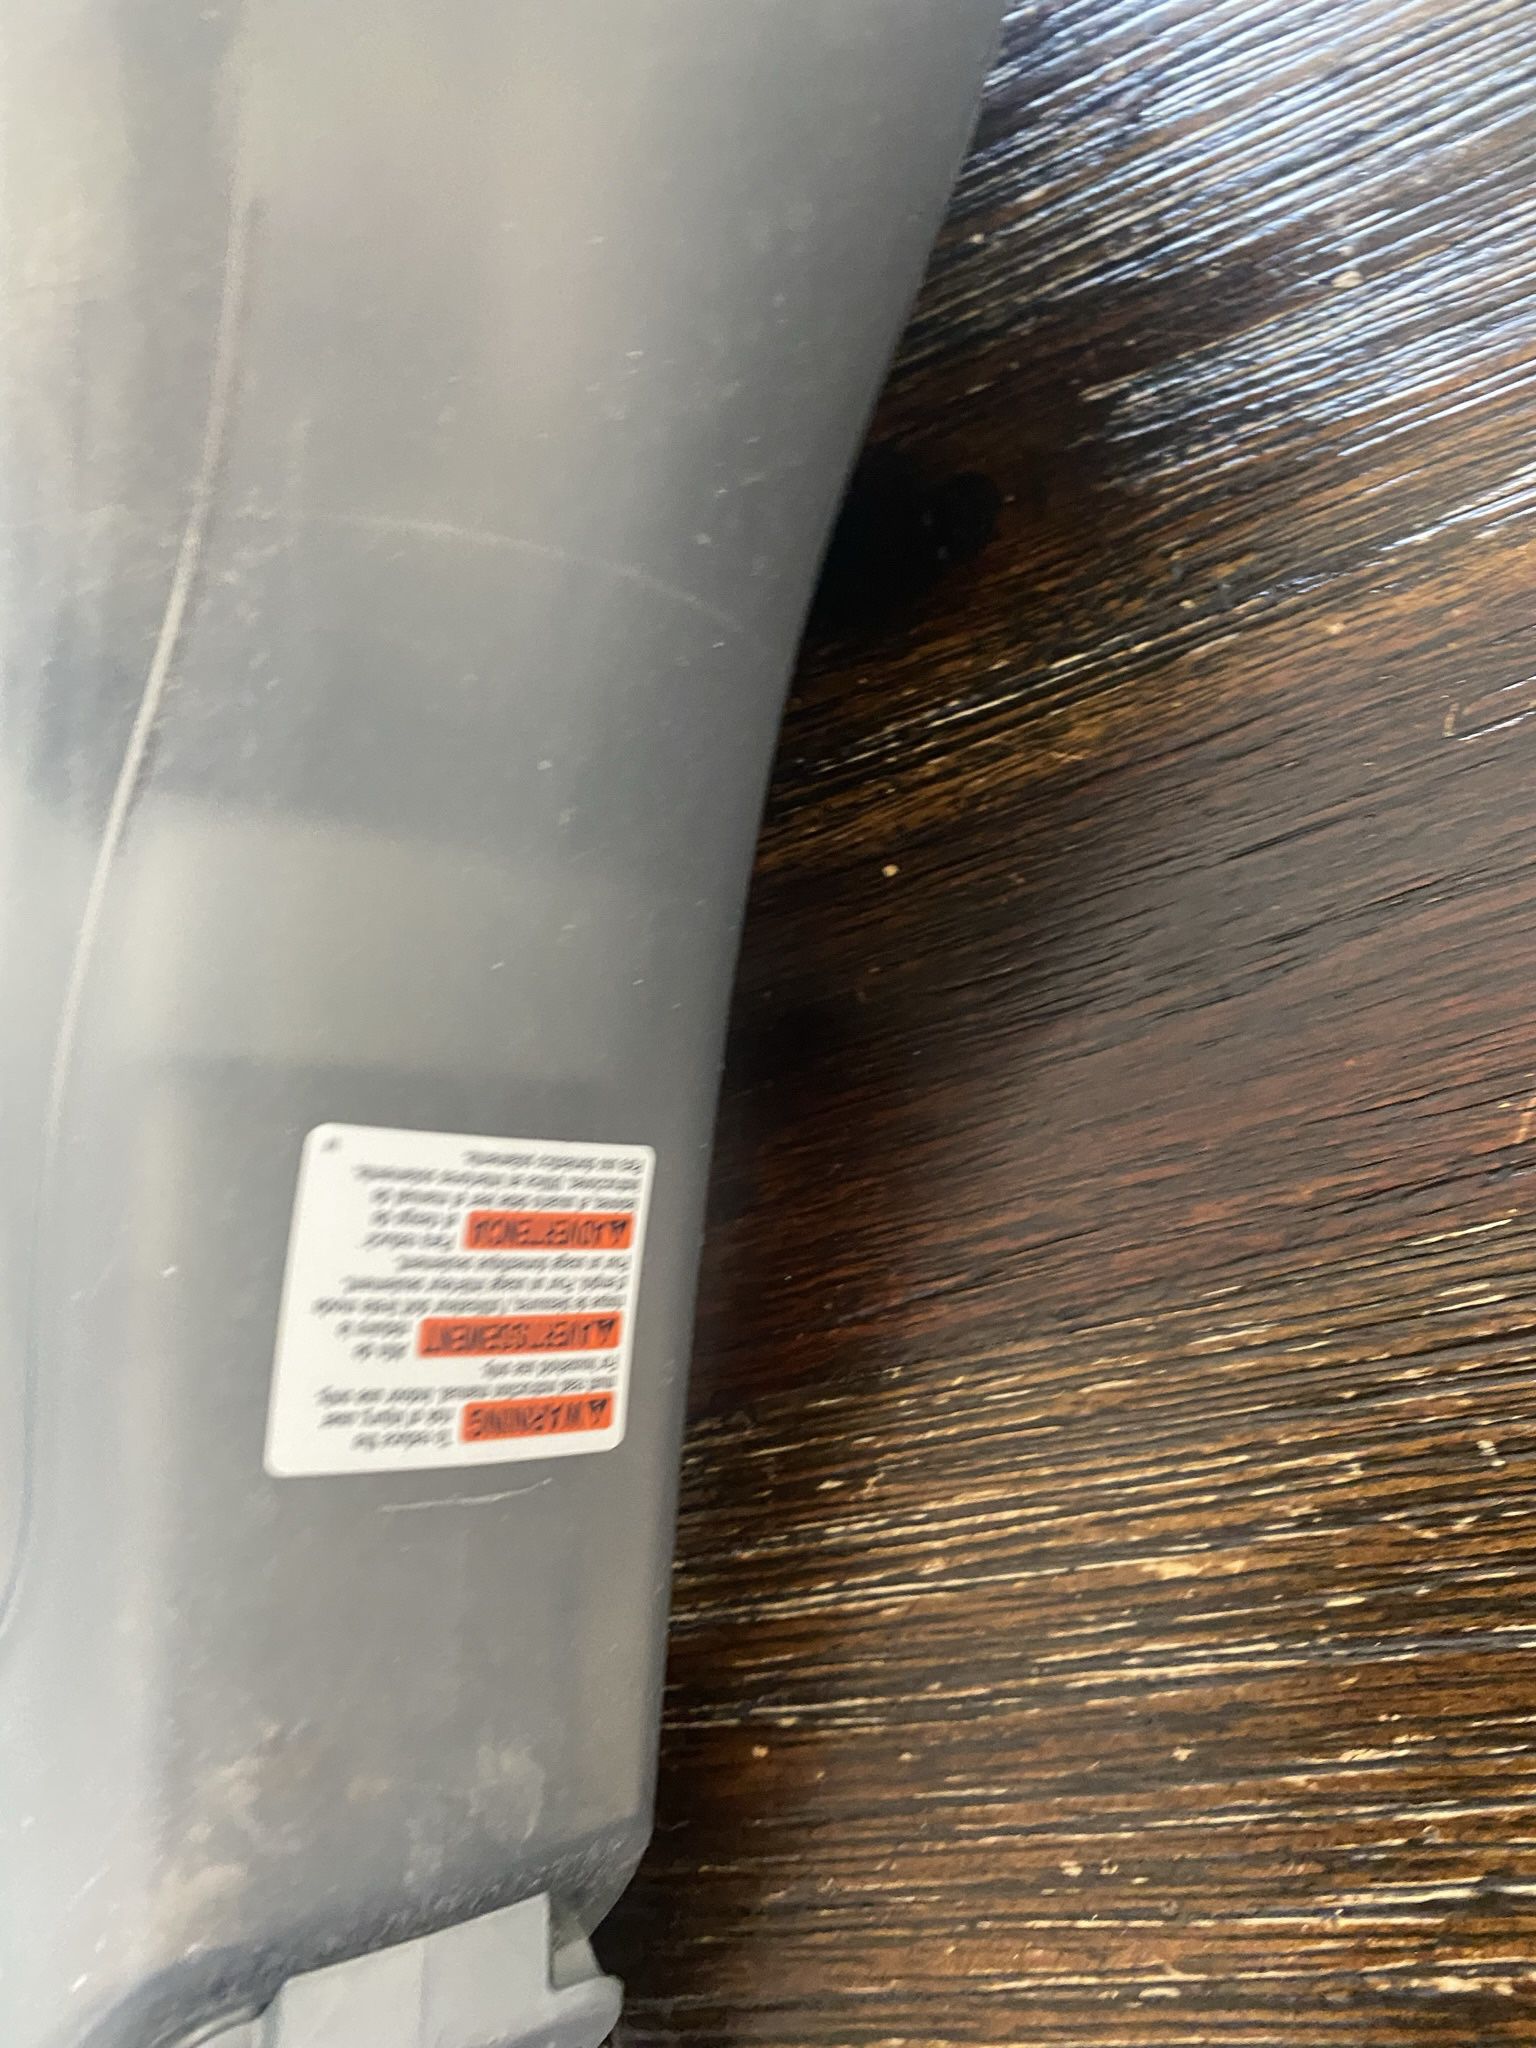 BLACK+DECKER Dustbuster Lithium Hand Vacuum - HHV1315J042. No attachments  or cord. But it works fine. Make an offer! for Sale in New York, NY -  OfferUp